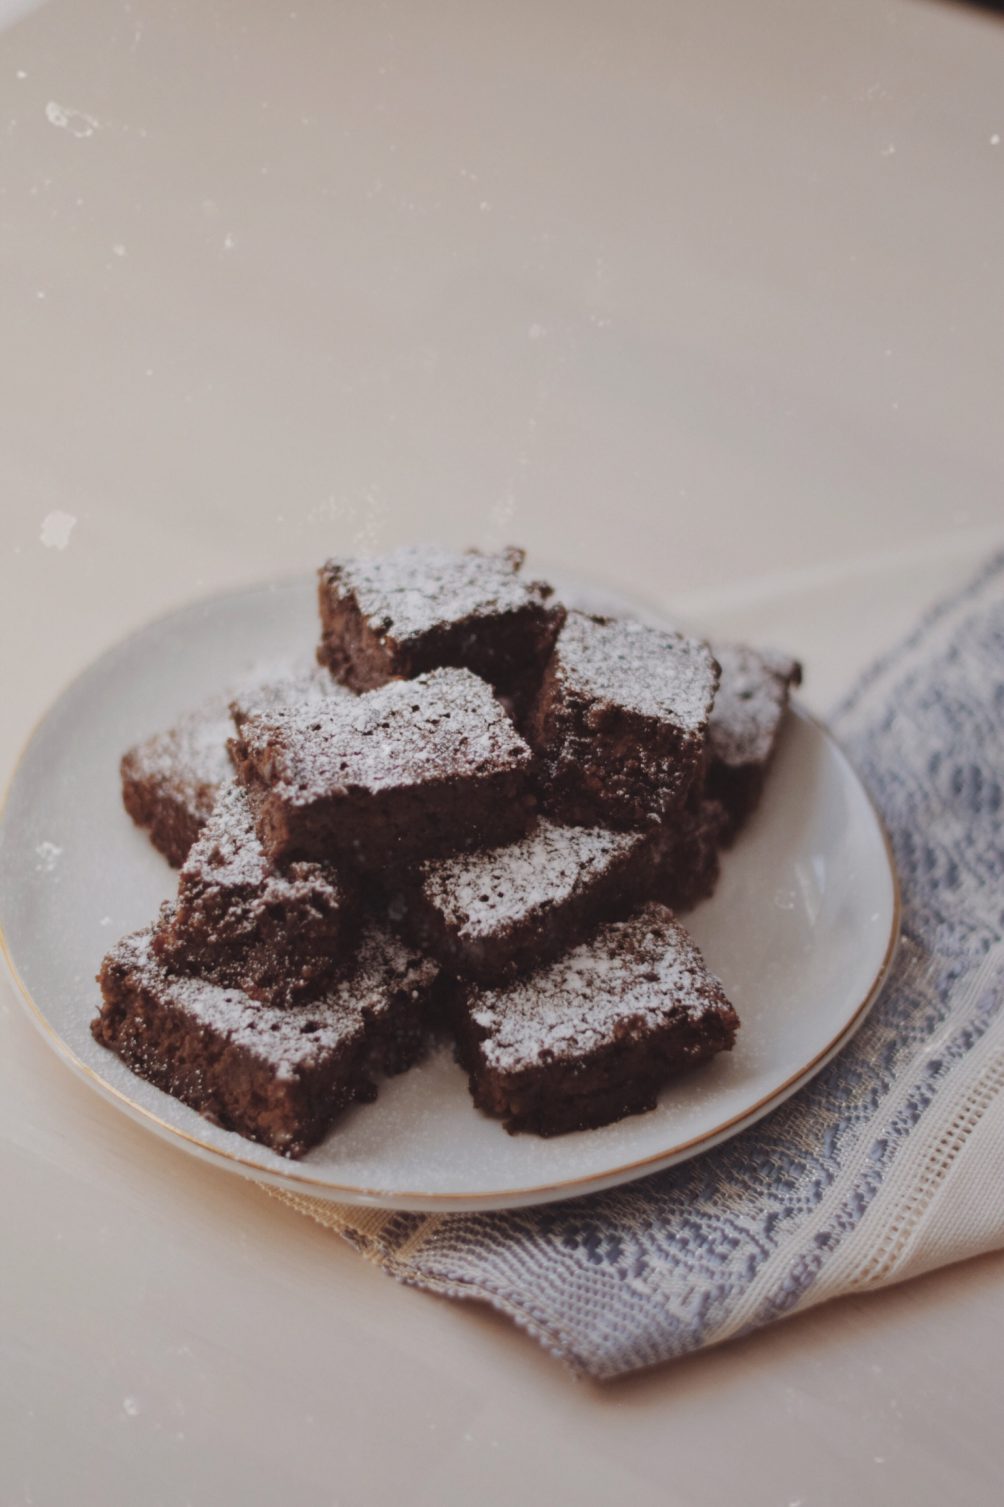 sharing a delicious and easy clean eating dessert recipe for healthy fudge brownies using black beans